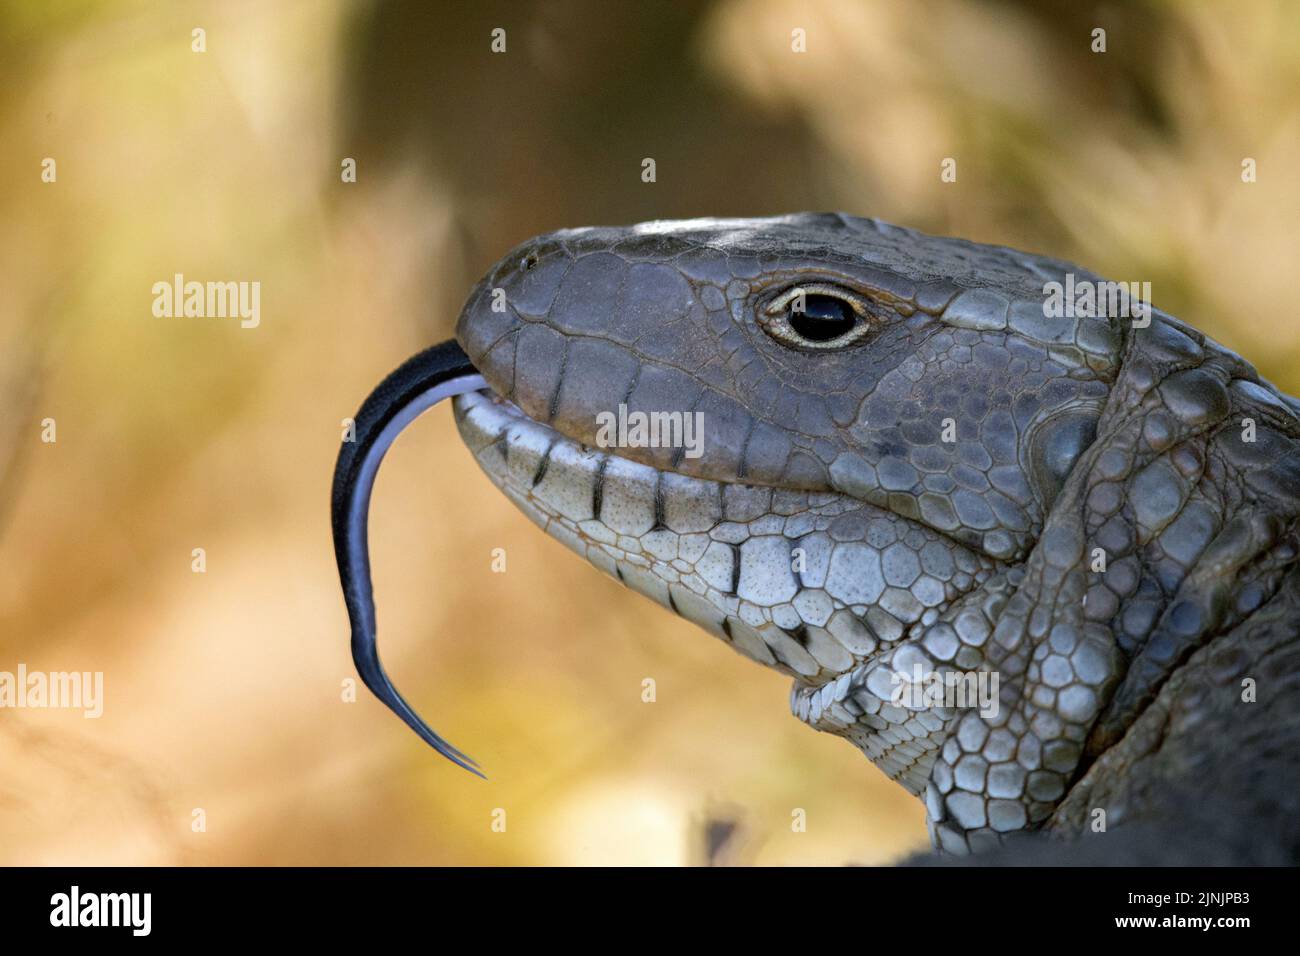 northern caiman lizard (Dracaena quianensis), darting its tongue in and out, portrait, Brazil, Pantanal Stock Photo